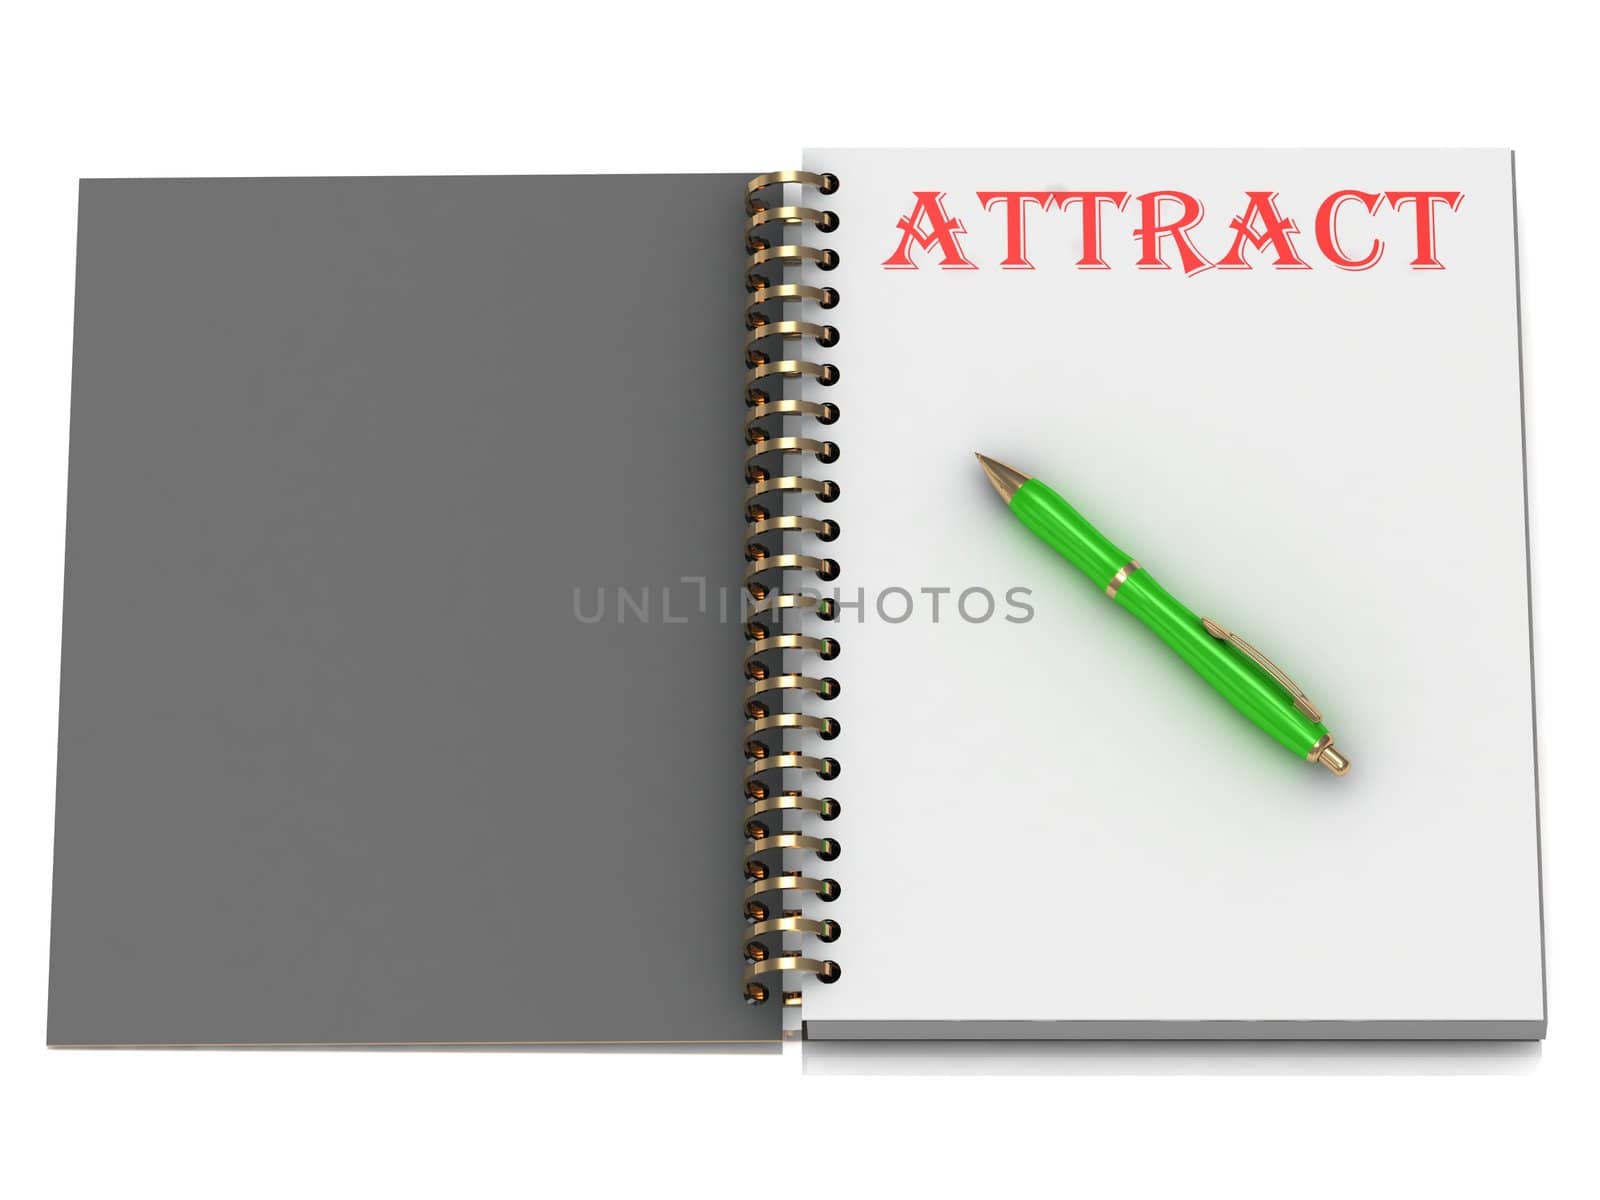 ATTRACT inscription on notebook page by GreenMost